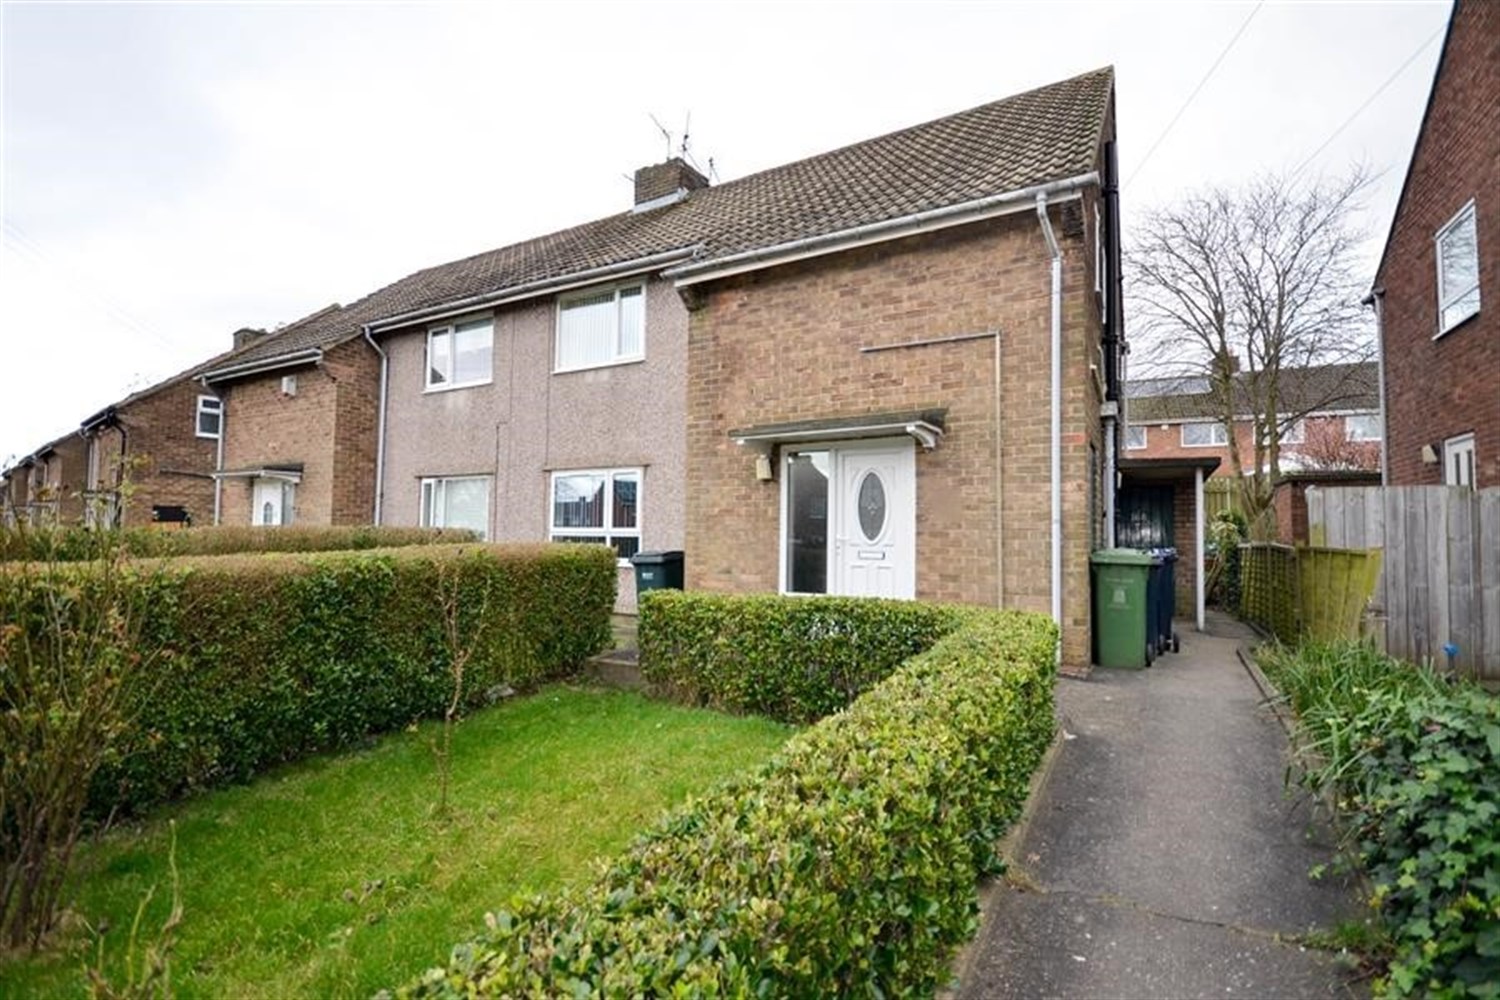 1 bed flat for sale in Millford, Leam Lane  - Property Image 1